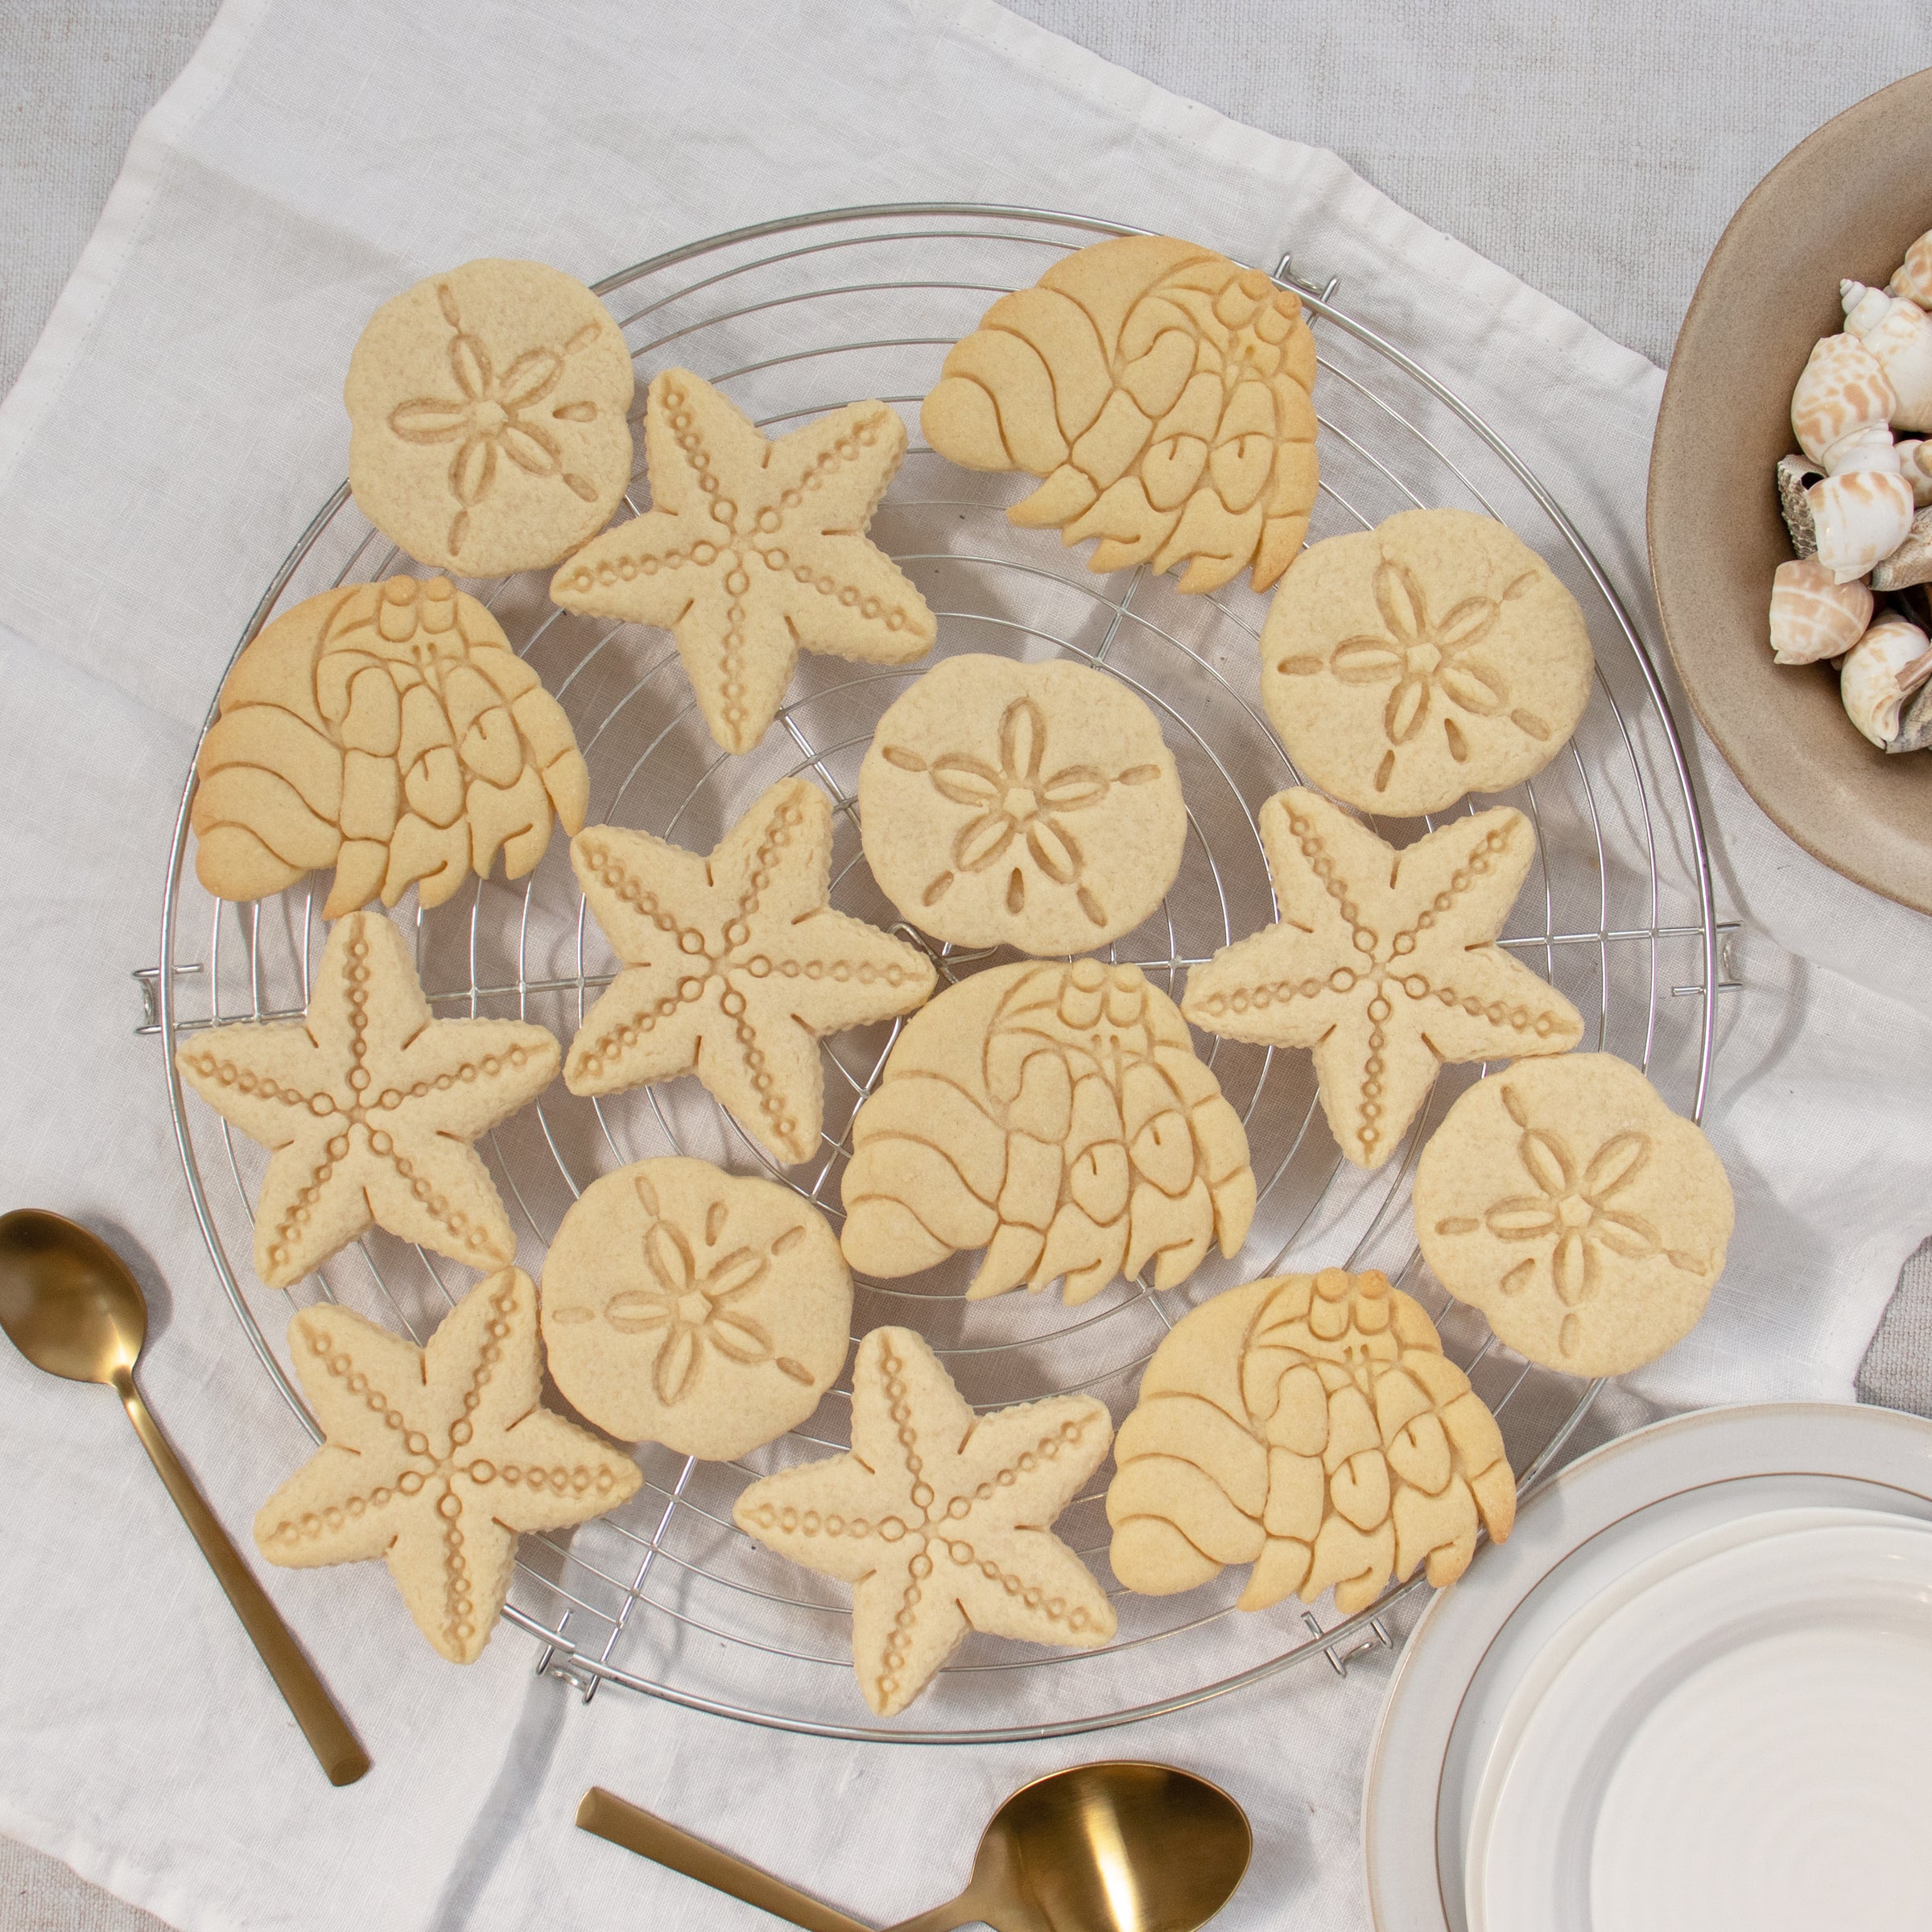 Set of 3 Nautical themed Cookies: Starfish, sand dollar, and hermit crab